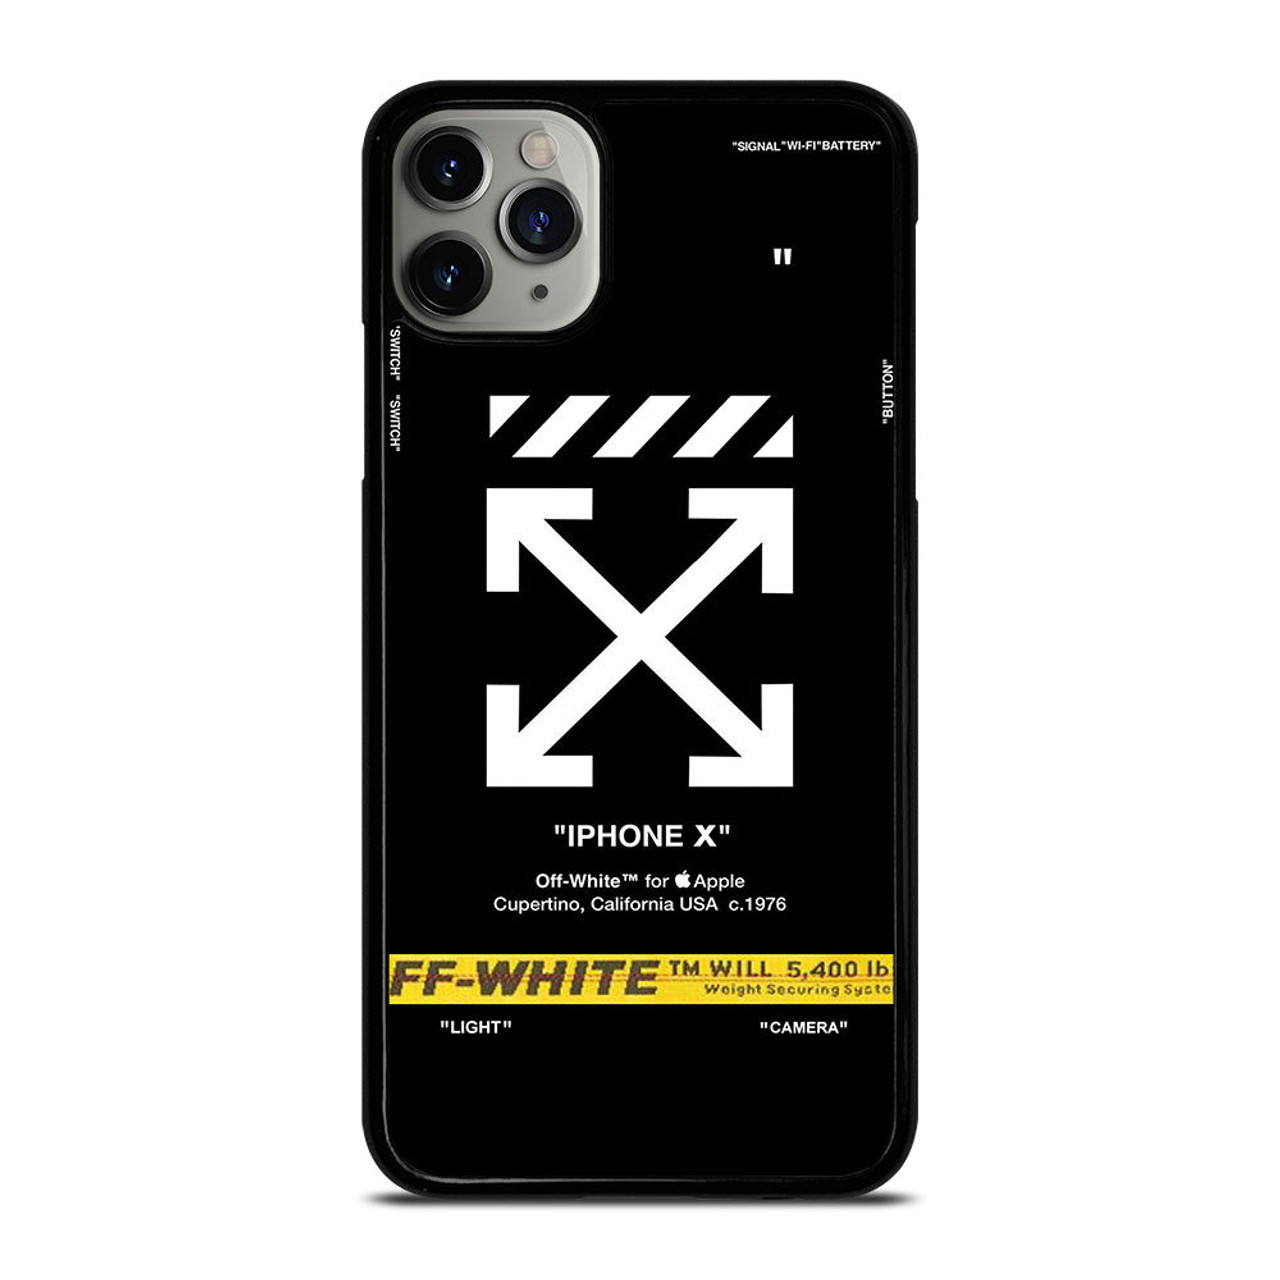 OFF WHITE NEW iPhone 11 Pro Max Case Cover